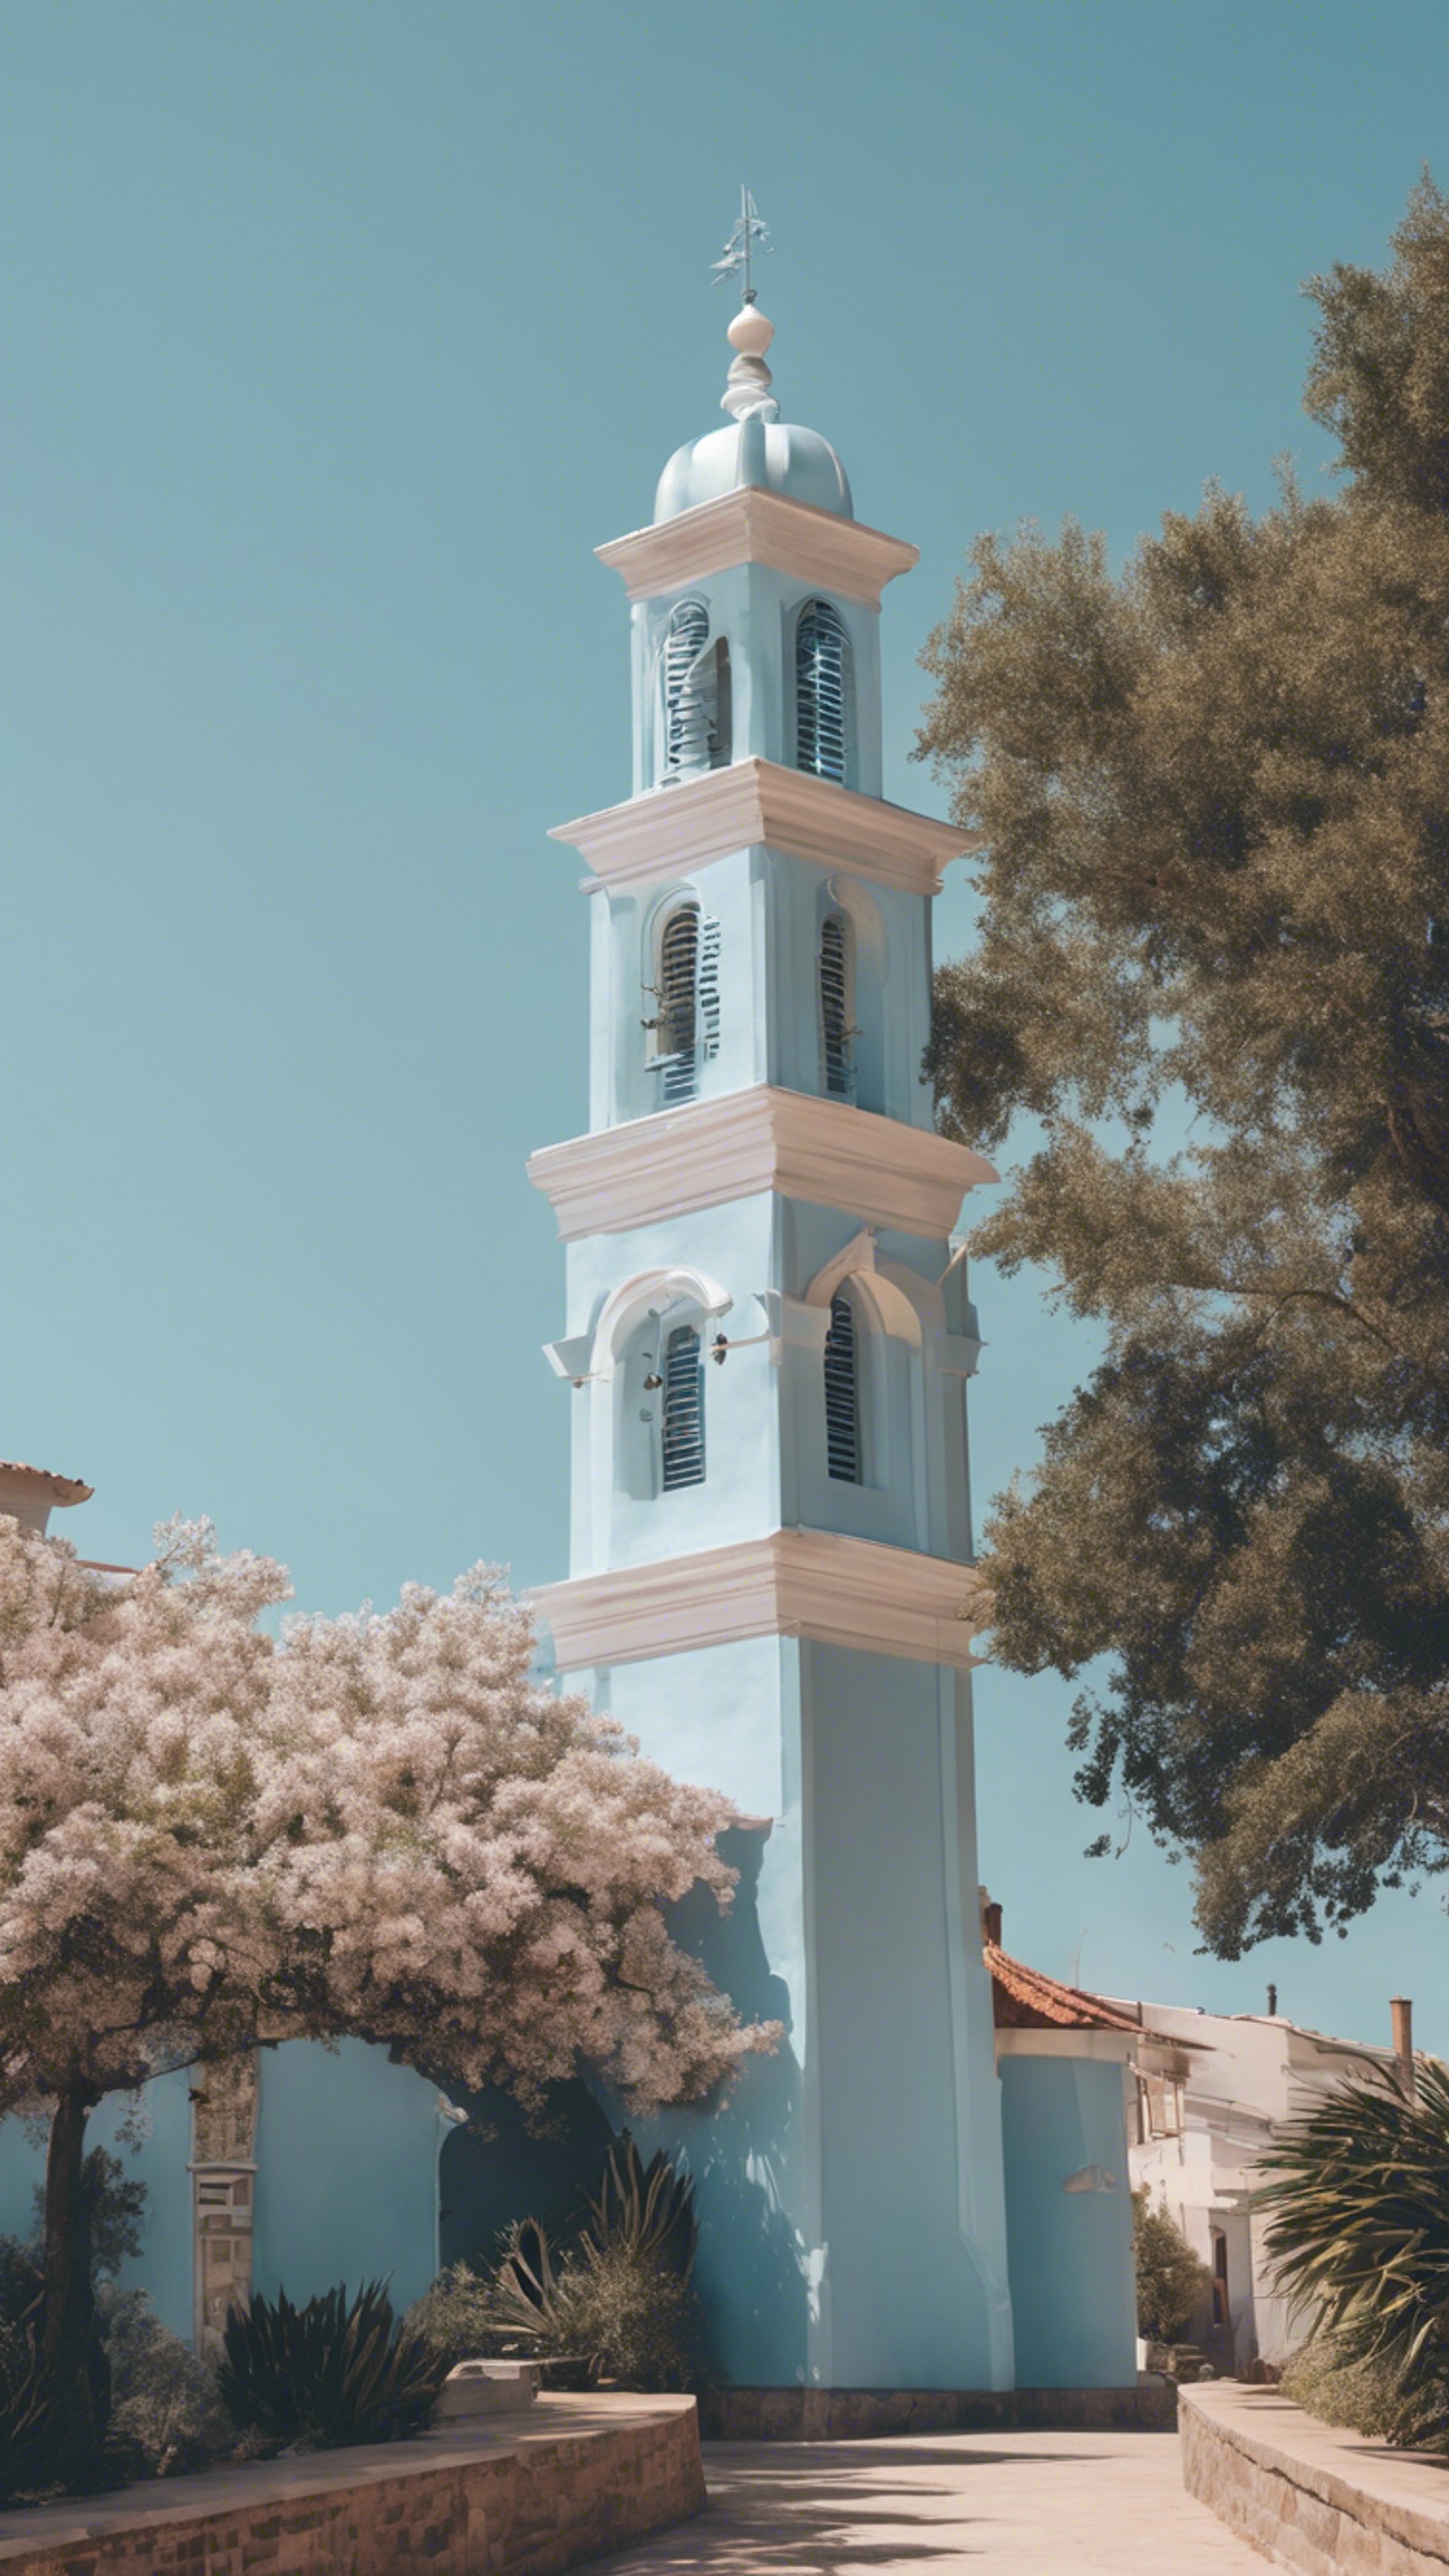 A stately pastel blue bell tower against a clear, sunny sky in a coastal town. Wallpaper[a05c52dcc3054b35b6be]